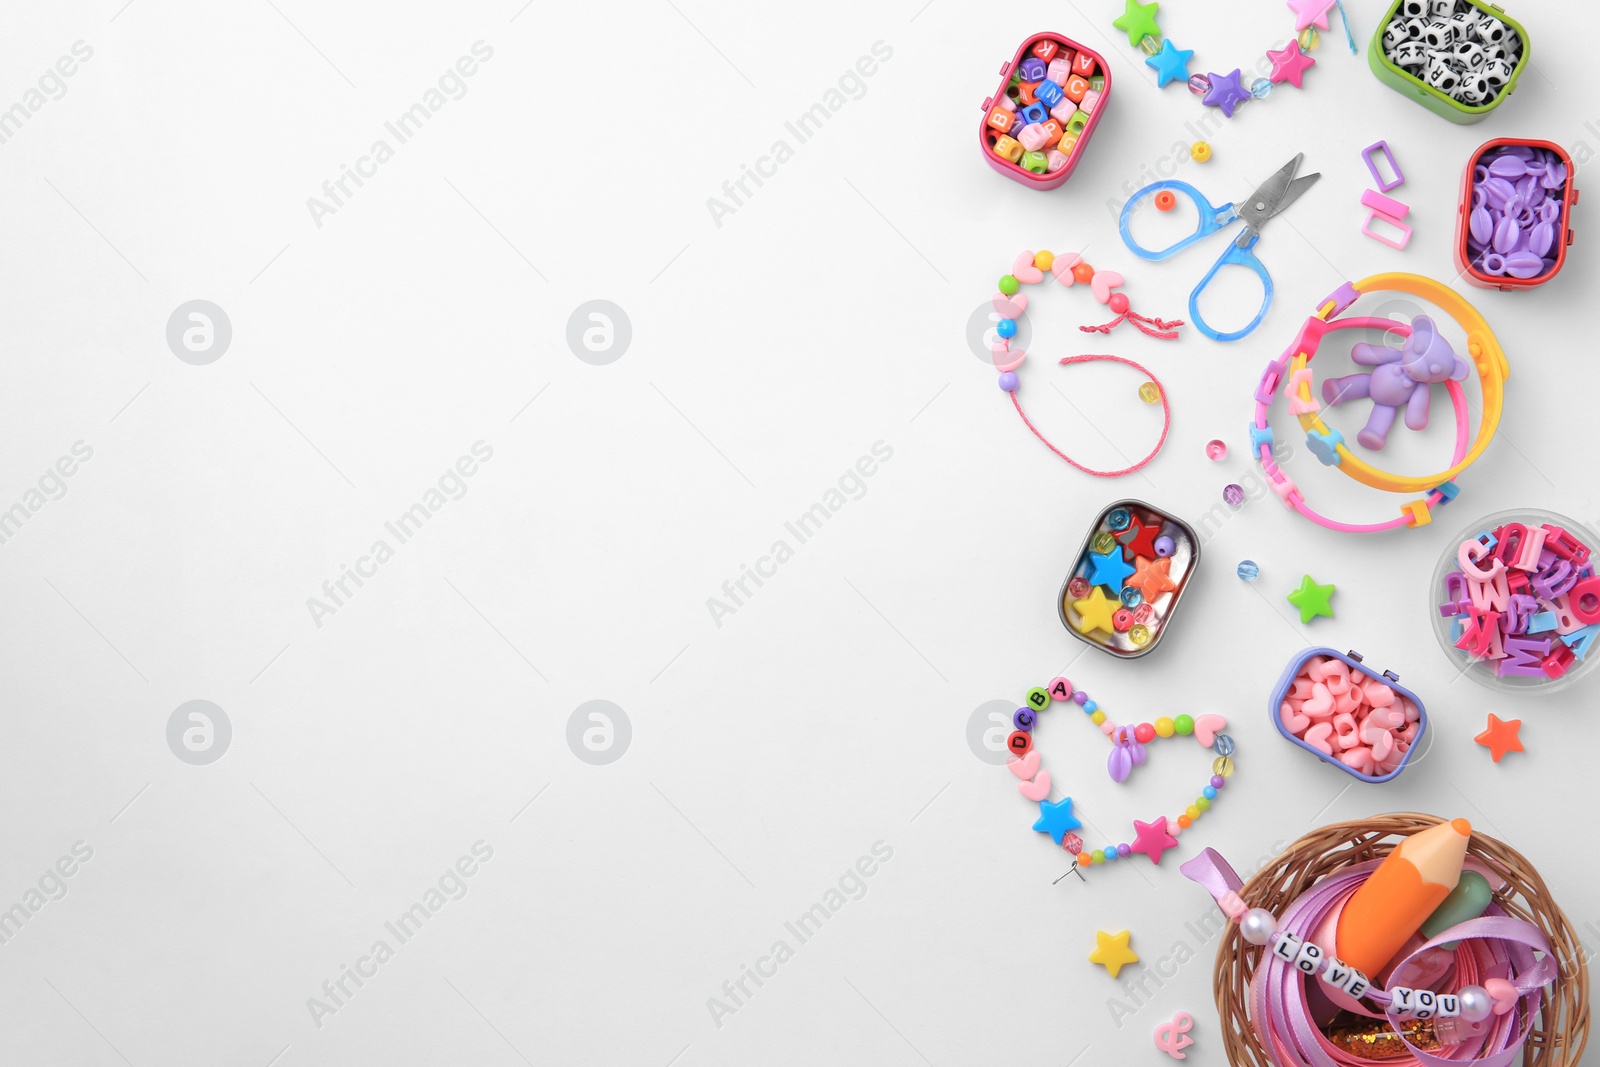 Photo of Kid's handmade beaded jewelry and different supplies on white background, top view. Space for text